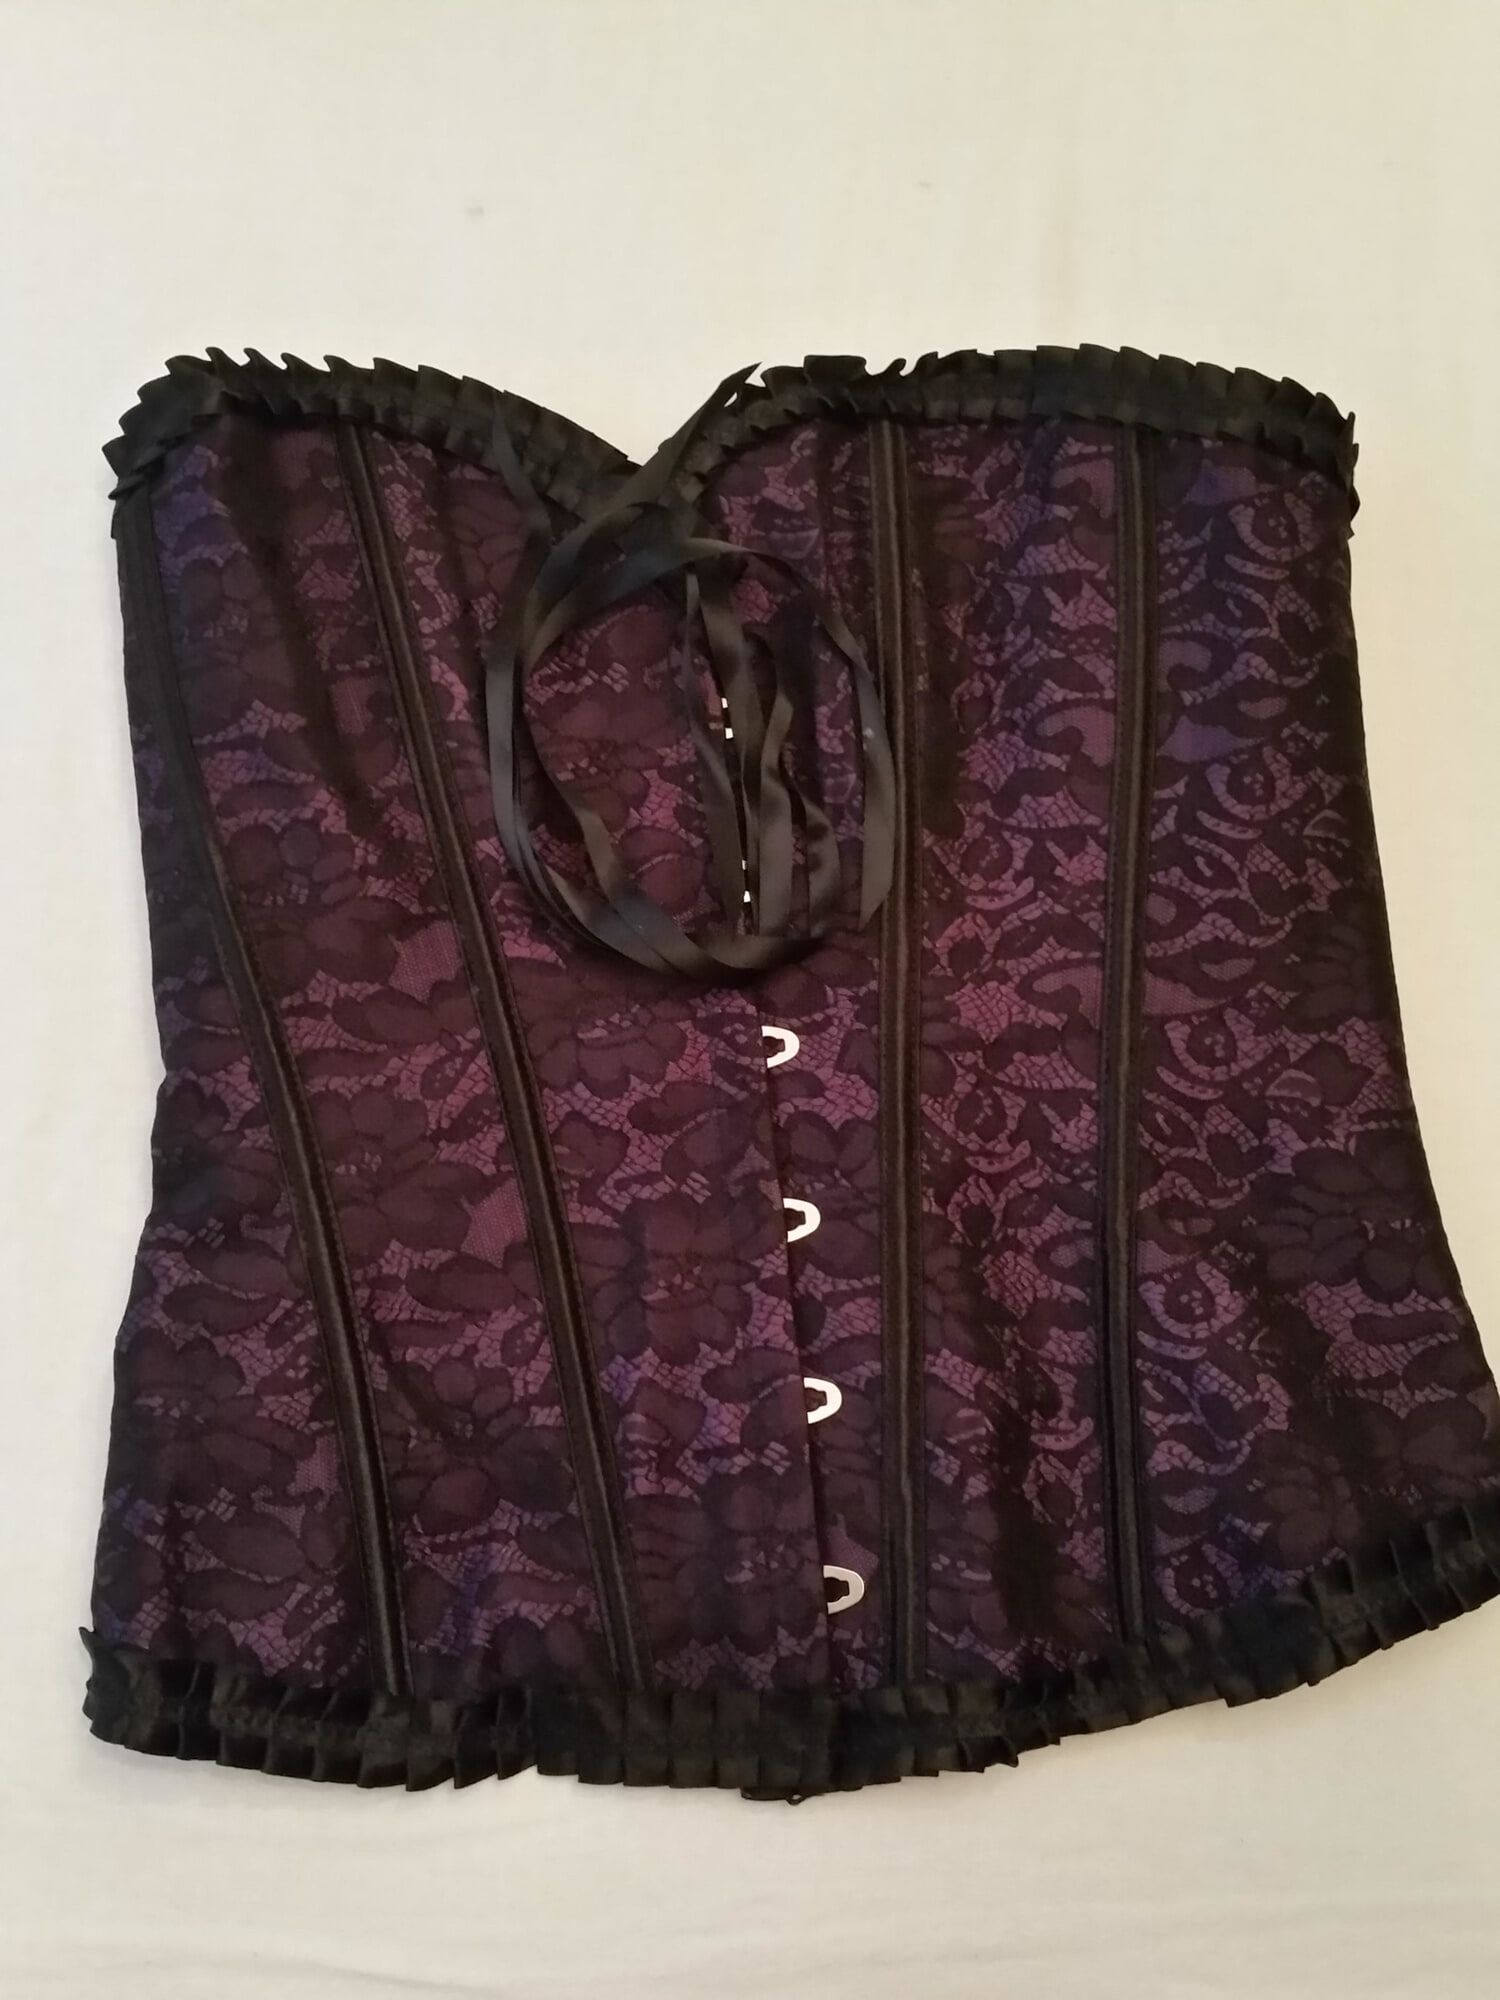 Crosssdressing Collection - Corsets #14